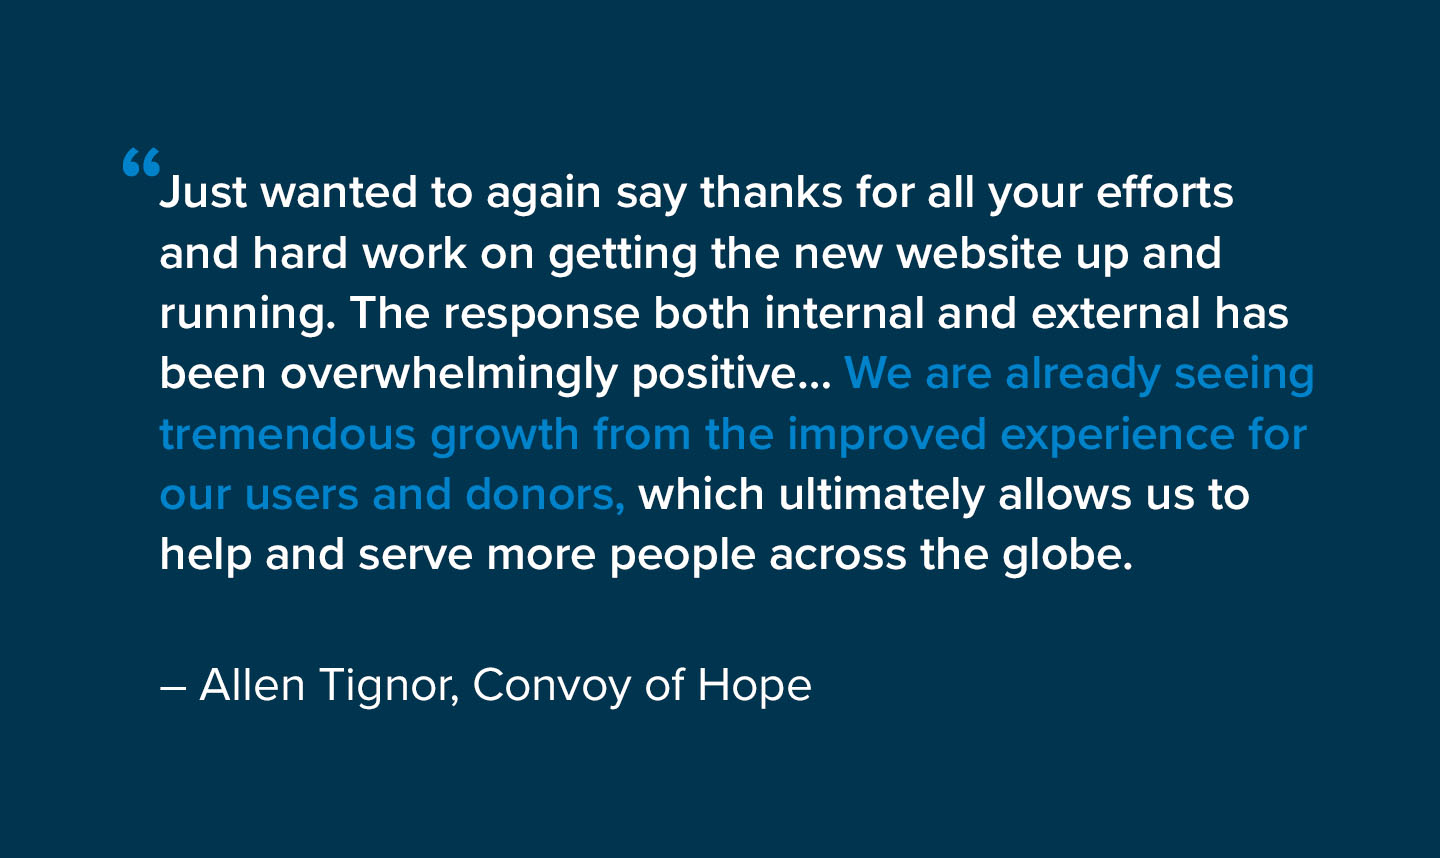 “Just wanted to again say thanks for all your efforts and hard work on getting the new website up and running. The response both internal and external has been overwhelmingly positive… We are already seeing tremendous growth from the improved experience for our users and donors, which ultimately allows us to help and serve more people across the globe.” – Allen Tignor, Convoy of Hope